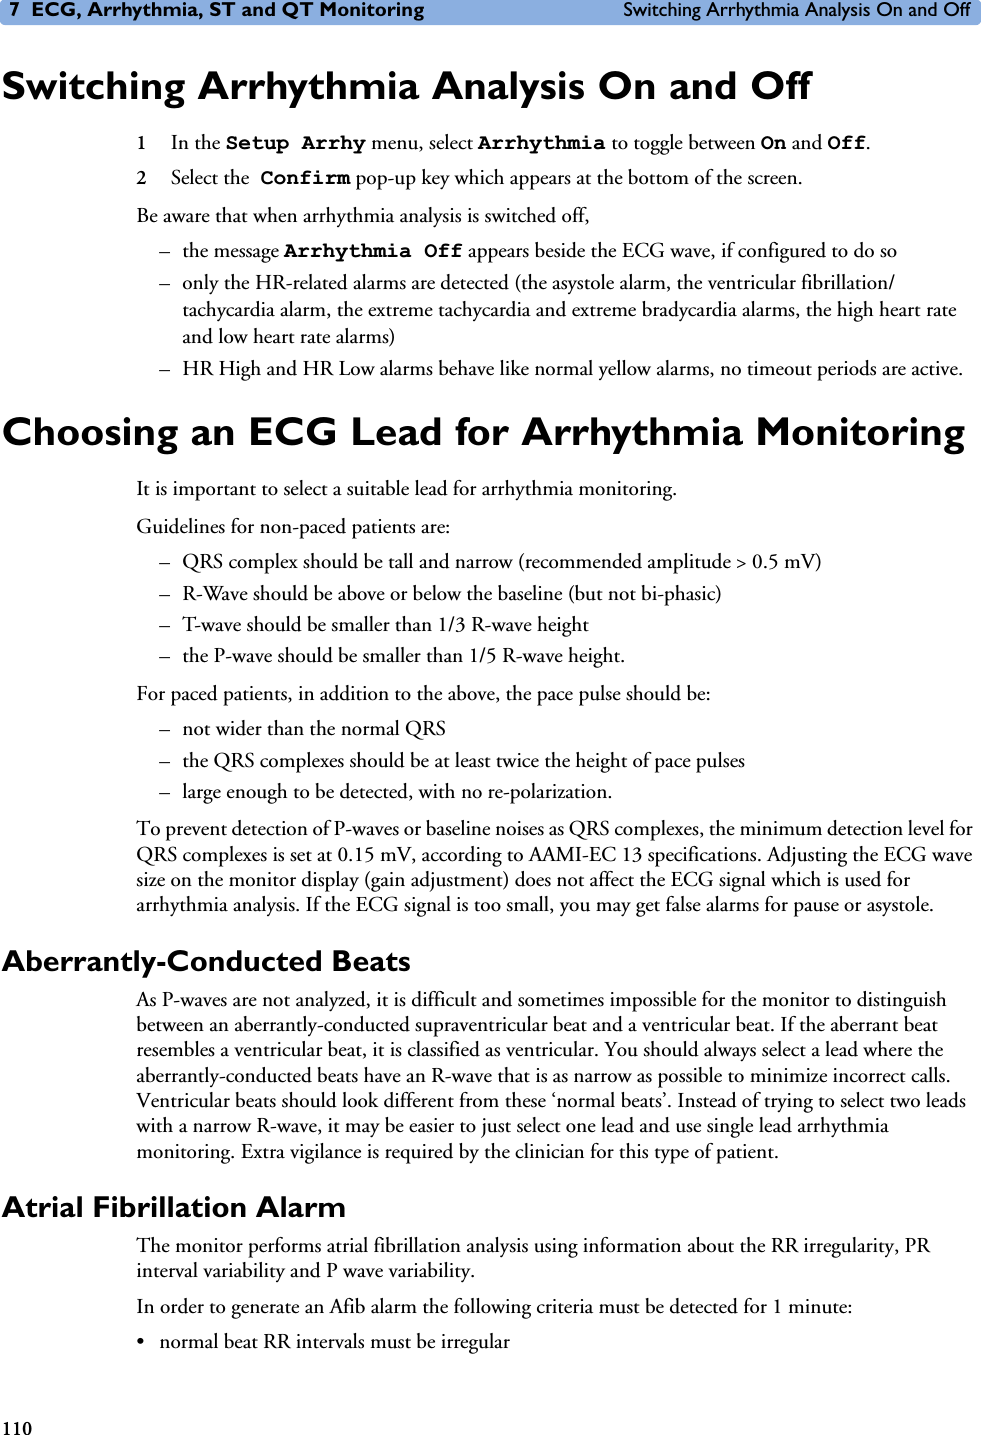 7 ECG, Arrhythmia, ST and QT Monitoring Switching Arrhythmia Analysis On and Off110Switching Arrhythmia Analysis On and Off1In the Setup Arrhy menu, select Arrhythmia to toggle between On and Off.2Select the Confirm pop-up key which appears at the bottom of the screen.Be aware that when arrhythmia analysis is switched off,–the message Arrhythmia Off appears beside the ECG wave, if configured to do so– only the HR-related alarms are detected (the asystole alarm, the ventricular fibrillation/tachycardia alarm, the extreme tachycardia and extreme bradycardia alarms, the high heart rate and low heart rate alarms)– HR High and HR Low alarms behave like normal yellow alarms, no timeout periods are active.Choosing an ECG Lead for Arrhythmia MonitoringIt is important to select a suitable lead for arrhythmia monitoring. Guidelines for non-paced patients are: – QRS complex should be tall and narrow (recommended amplitude &gt; 0.5 mV) – R-Wave should be above or below the baseline (but not bi-phasic) – T-wave should be smaller than 1/3 R-wave height – the P-wave should be smaller than 1/5 R-wave height.For paced patients, in addition to the above, the pace pulse should be:– not wider than the normal QRS– the QRS complexes should be at least twice the height of pace pulses– large enough to be detected, with no re-polarization.To prevent detection of P-waves or baseline noises as QRS complexes, the minimum detection level for QRS complexes is set at 0.15 mV, according to AAMI-EC 13 specifications. Adjusting the ECG wave size on the monitor display (gain adjustment) does not affect the ECG signal which is used for arrhythmia analysis. If the ECG signal is too small, you may get false alarms for pause or asystole. Aberrantly-Conducted BeatsAs P-waves are not analyzed, it is difficult and sometimes impossible for the monitor to distinguish between an aberrantly-conducted supraventricular beat and a ventricular beat. If the aberrant beat resembles a ventricular beat, it is classified as ventricular. You should always select a lead where the aberrantly-conducted beats have an R-wave that is as narrow as possible to minimize incorrect calls. Ventricular beats should look different from these ‘normal beats’. Instead of trying to select two leads with a narrow R-wave, it may be easier to just select one lead and use single lead arrhythmia monitoring. Extra vigilance is required by the clinician for this type of patient.Atrial Fibrillation AlarmThe monitor performs atrial fibrillation analysis using information about the RR irregularity, PR interval variability and P wave variability.In order to generate an Afib alarm the following criteria must be detected for 1 minute:• normal beat RR intervals must be irregular